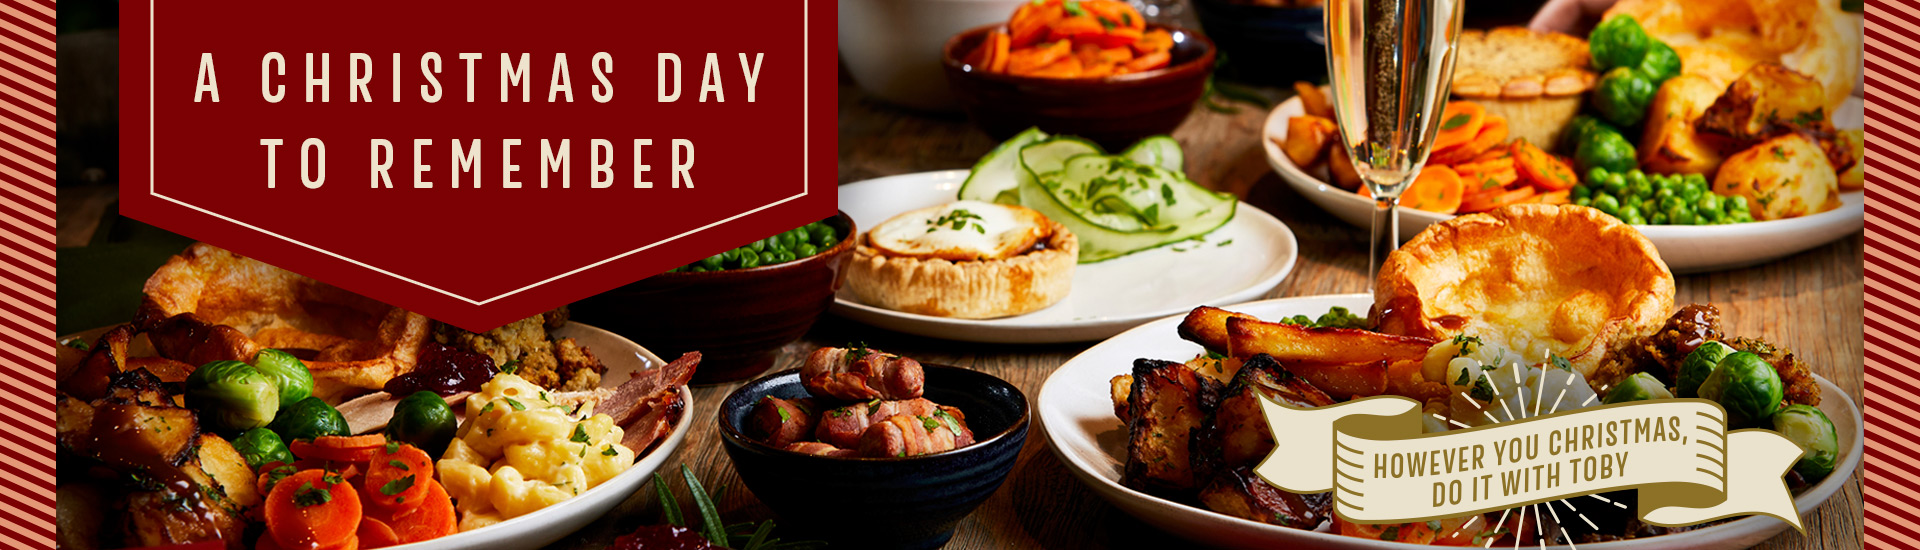 Christmas Day menu at Toby Carvery Strathclyde Park